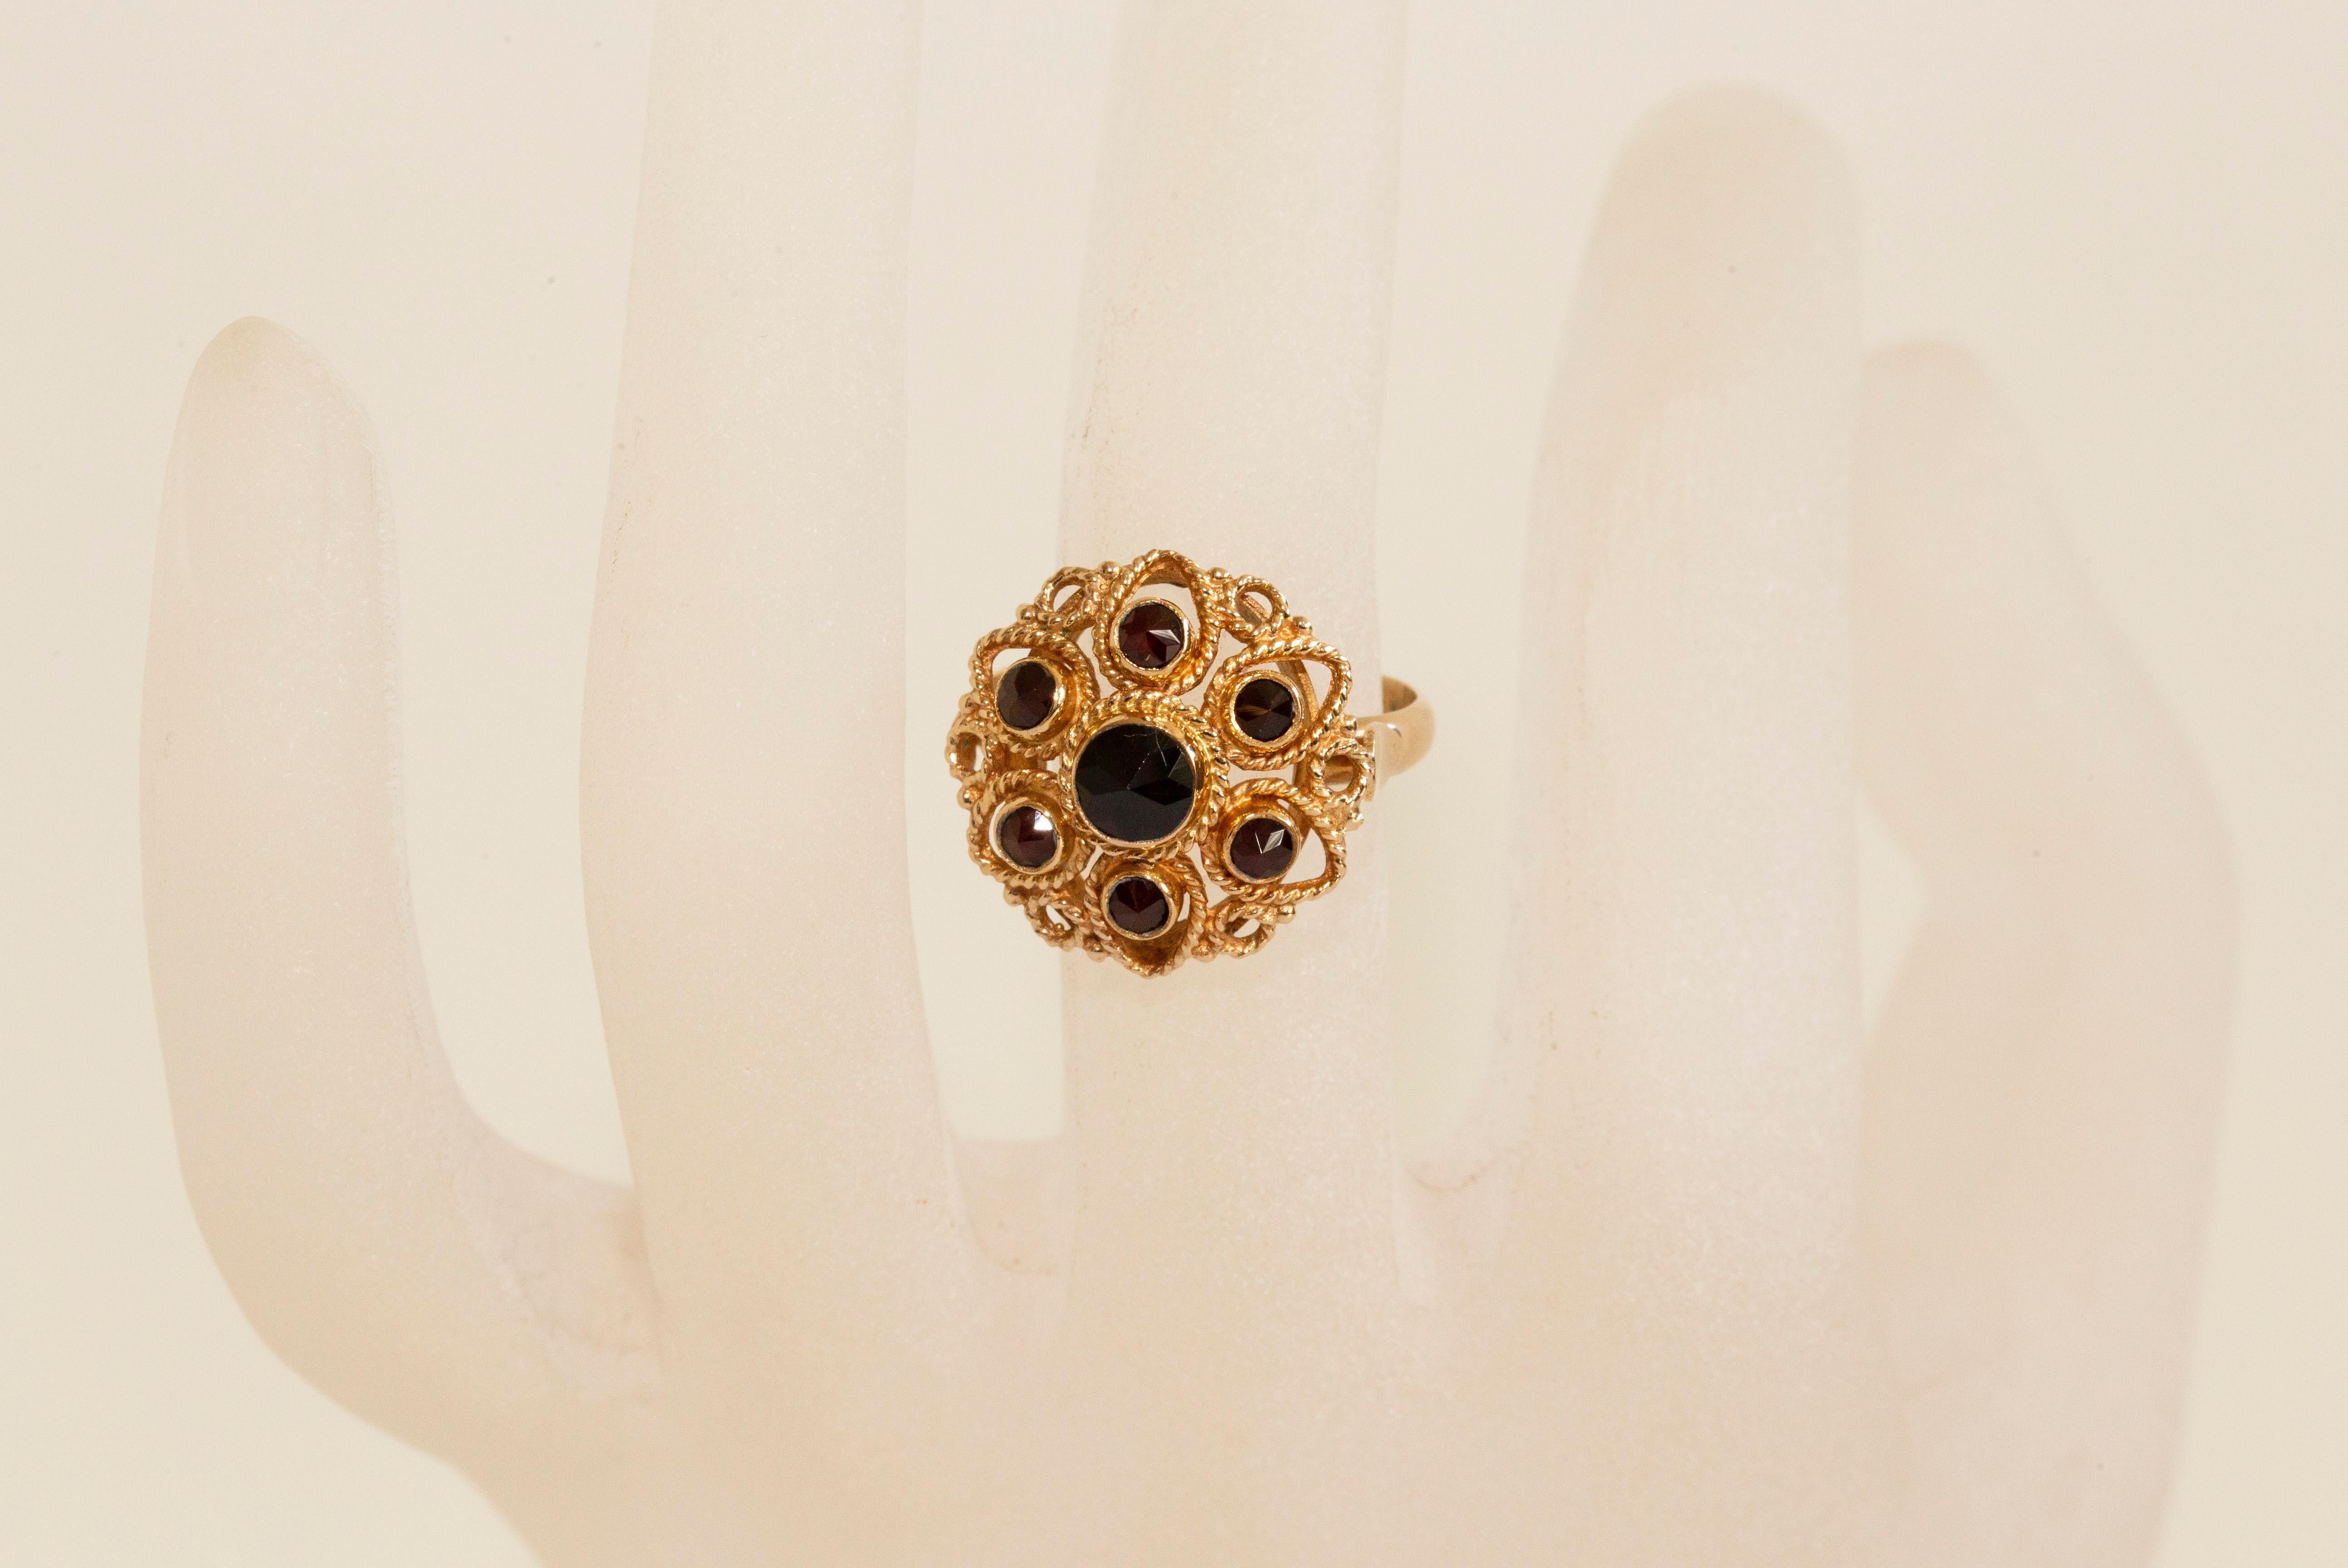 Etruscan Revival 14 Karat Yellow Gold Ring with Garnets in Filigree Flower Setting For Sale